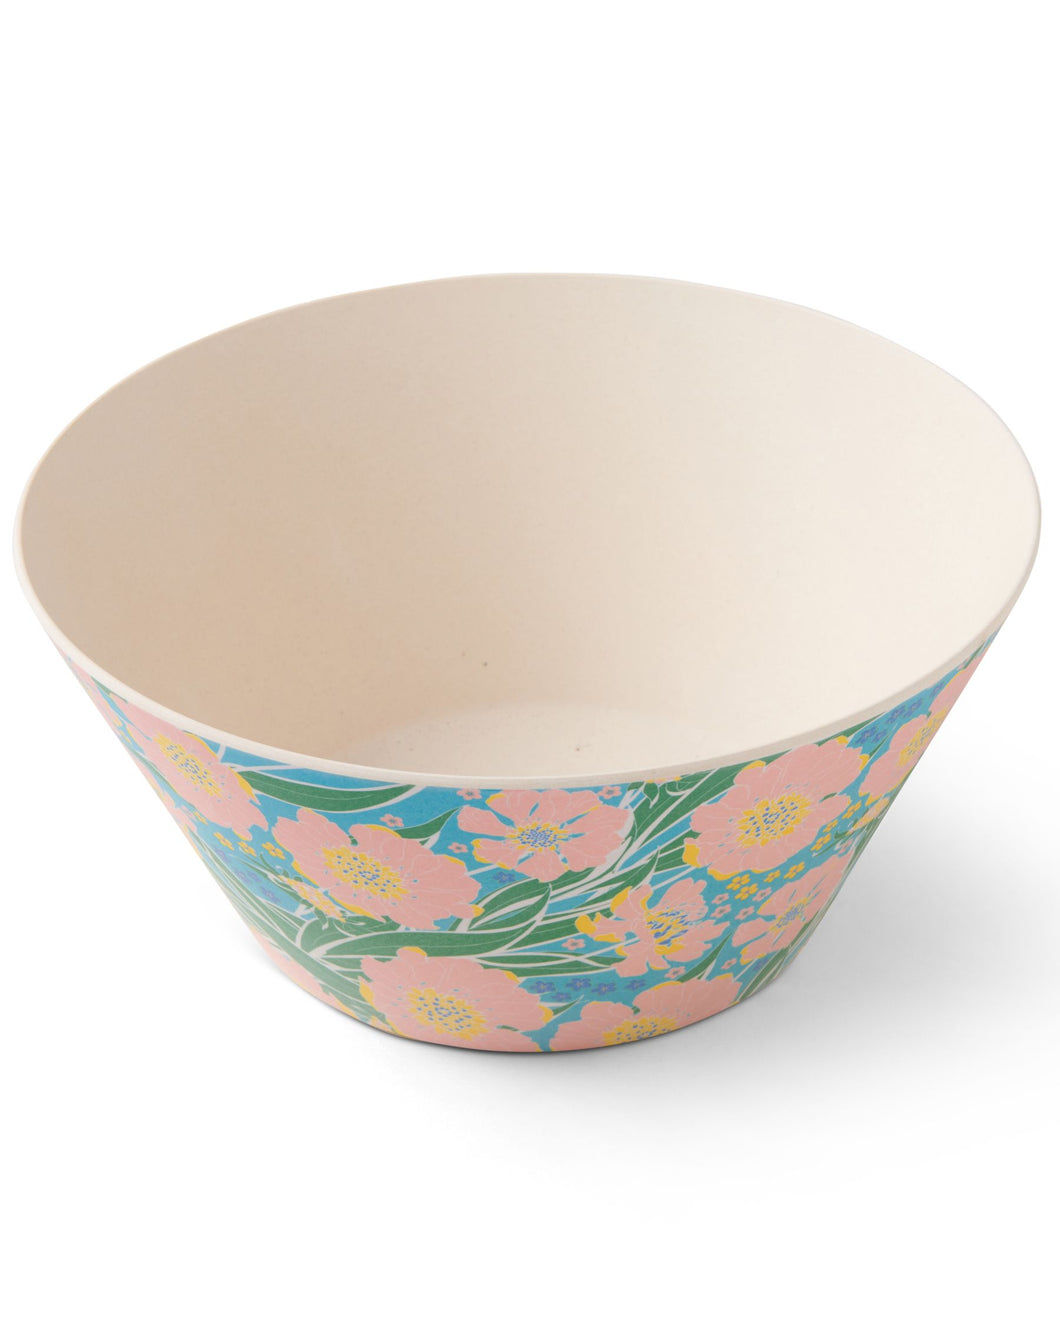 Tumbling Flowers Salad Bowl One Size